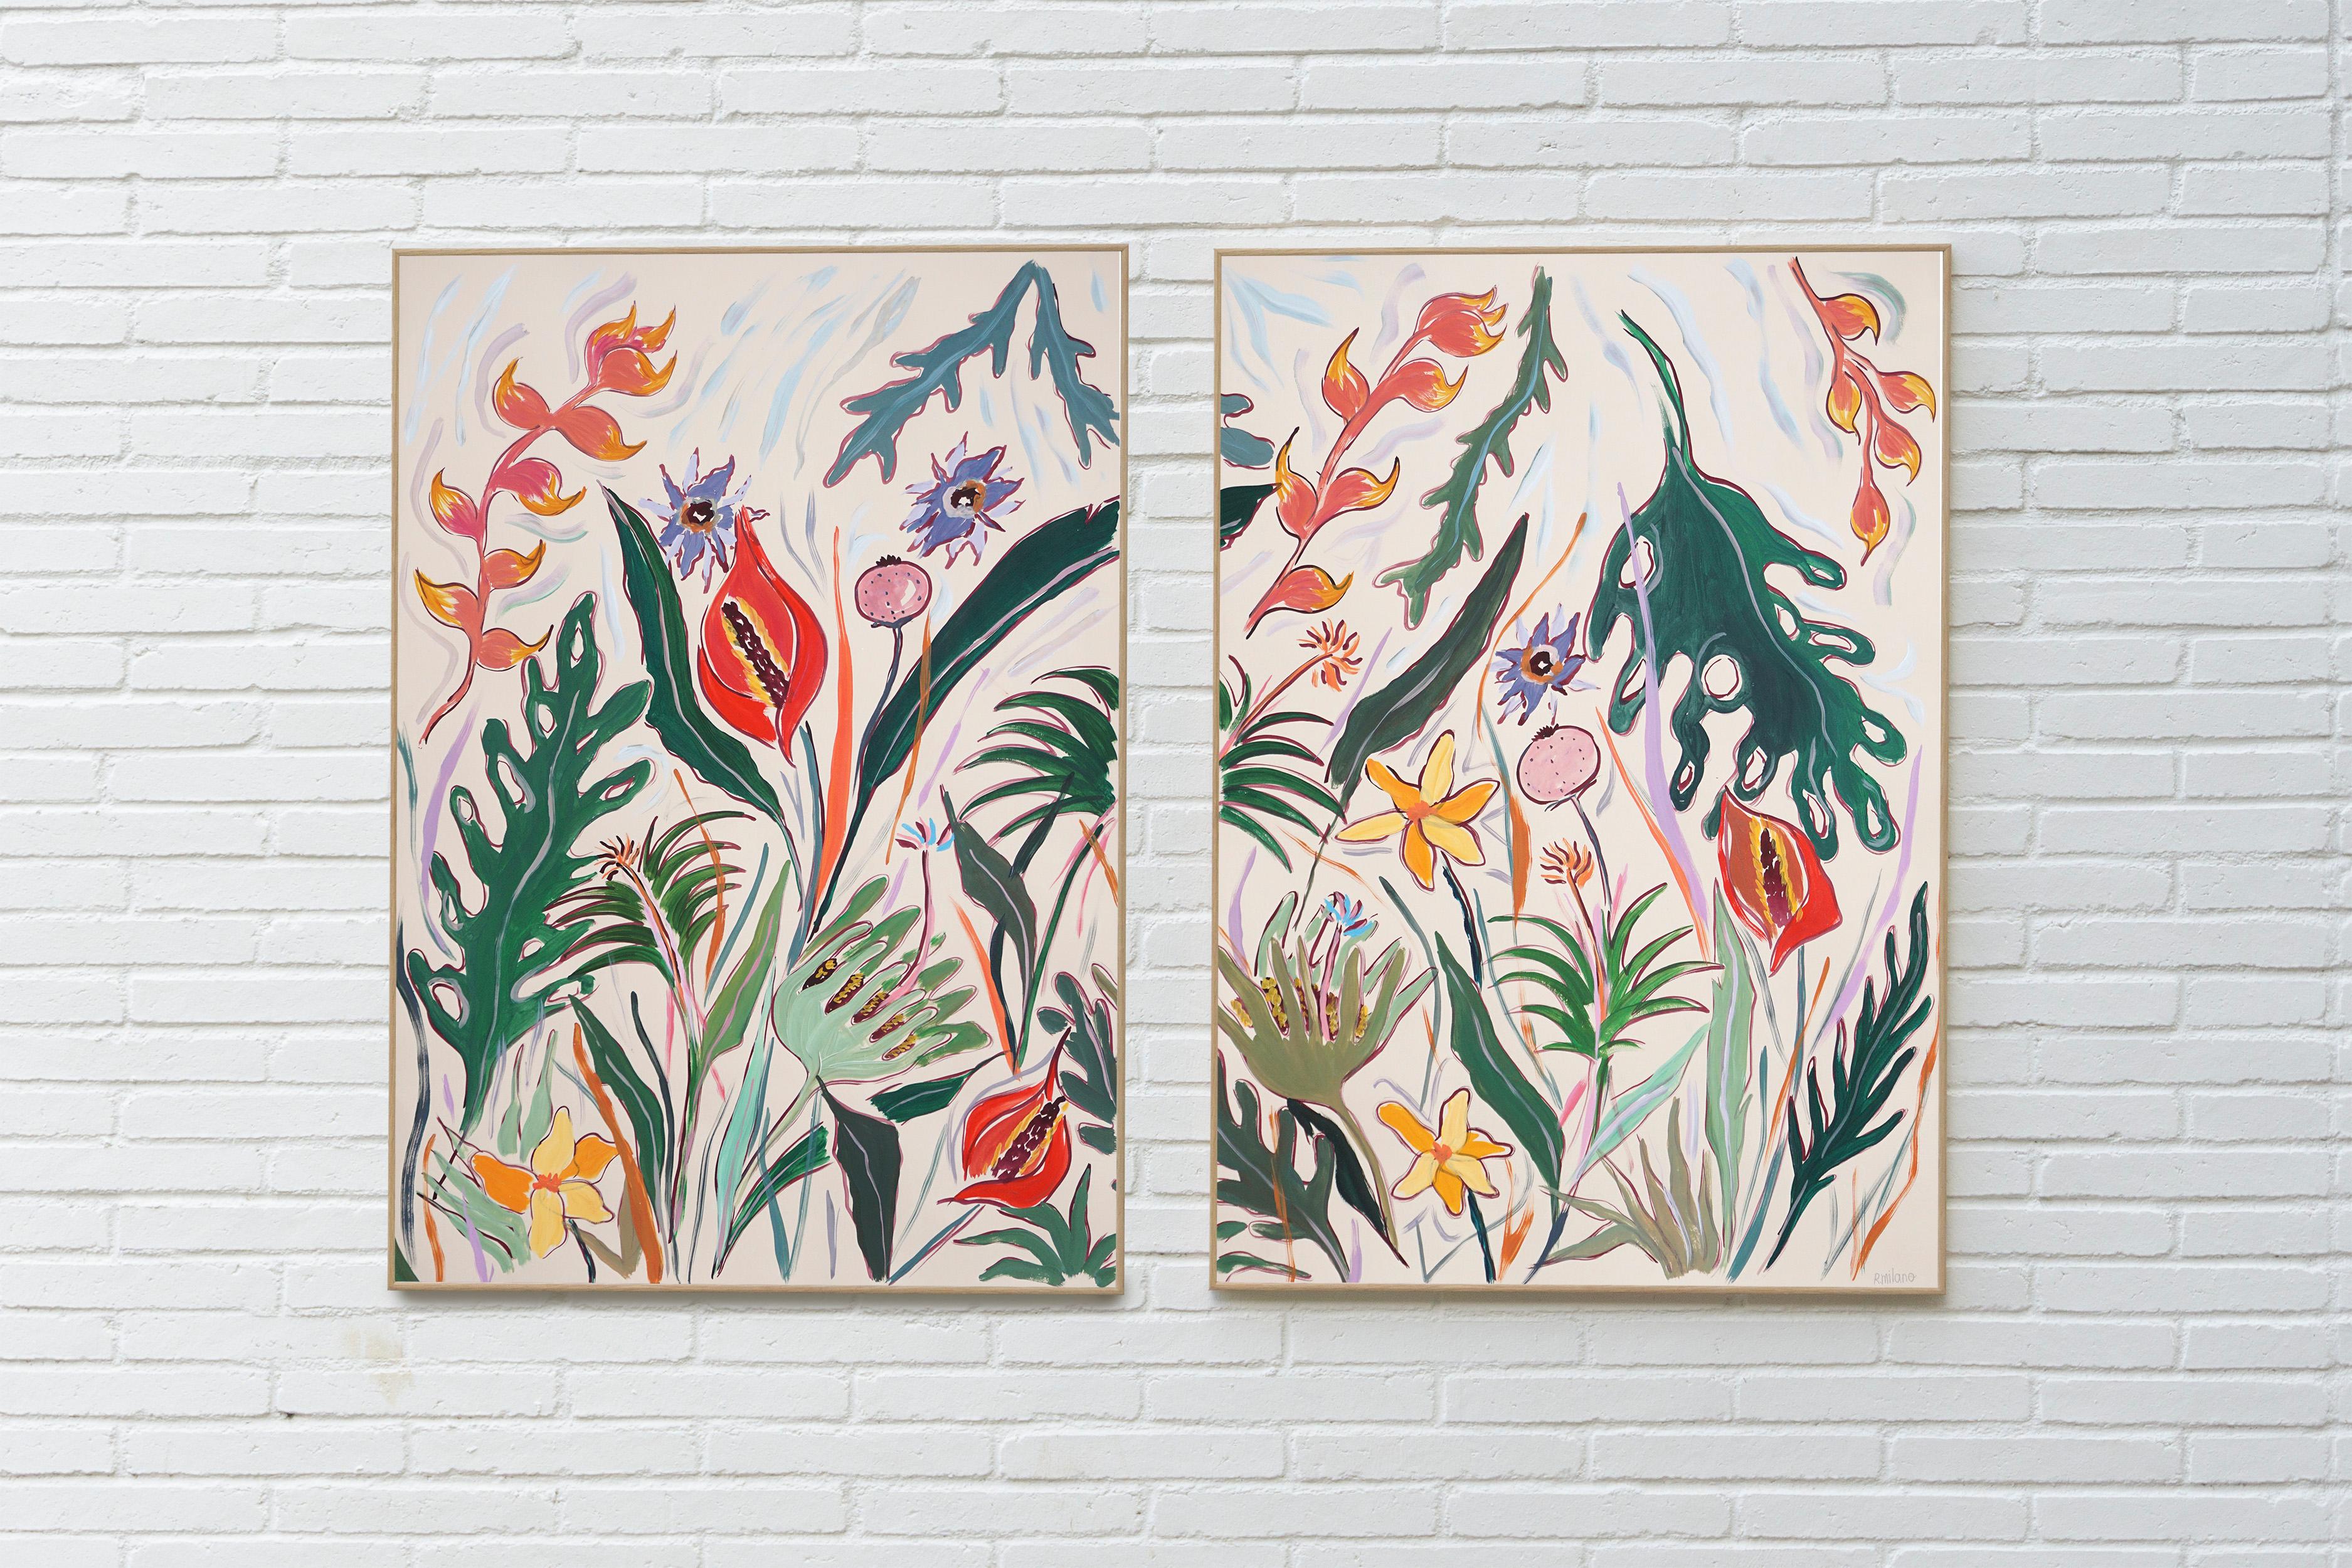 Tropical Flowers Garden, Illustration Style Diptych, Flamingo Plant Red Laceleaf - Painting by Romina Milano